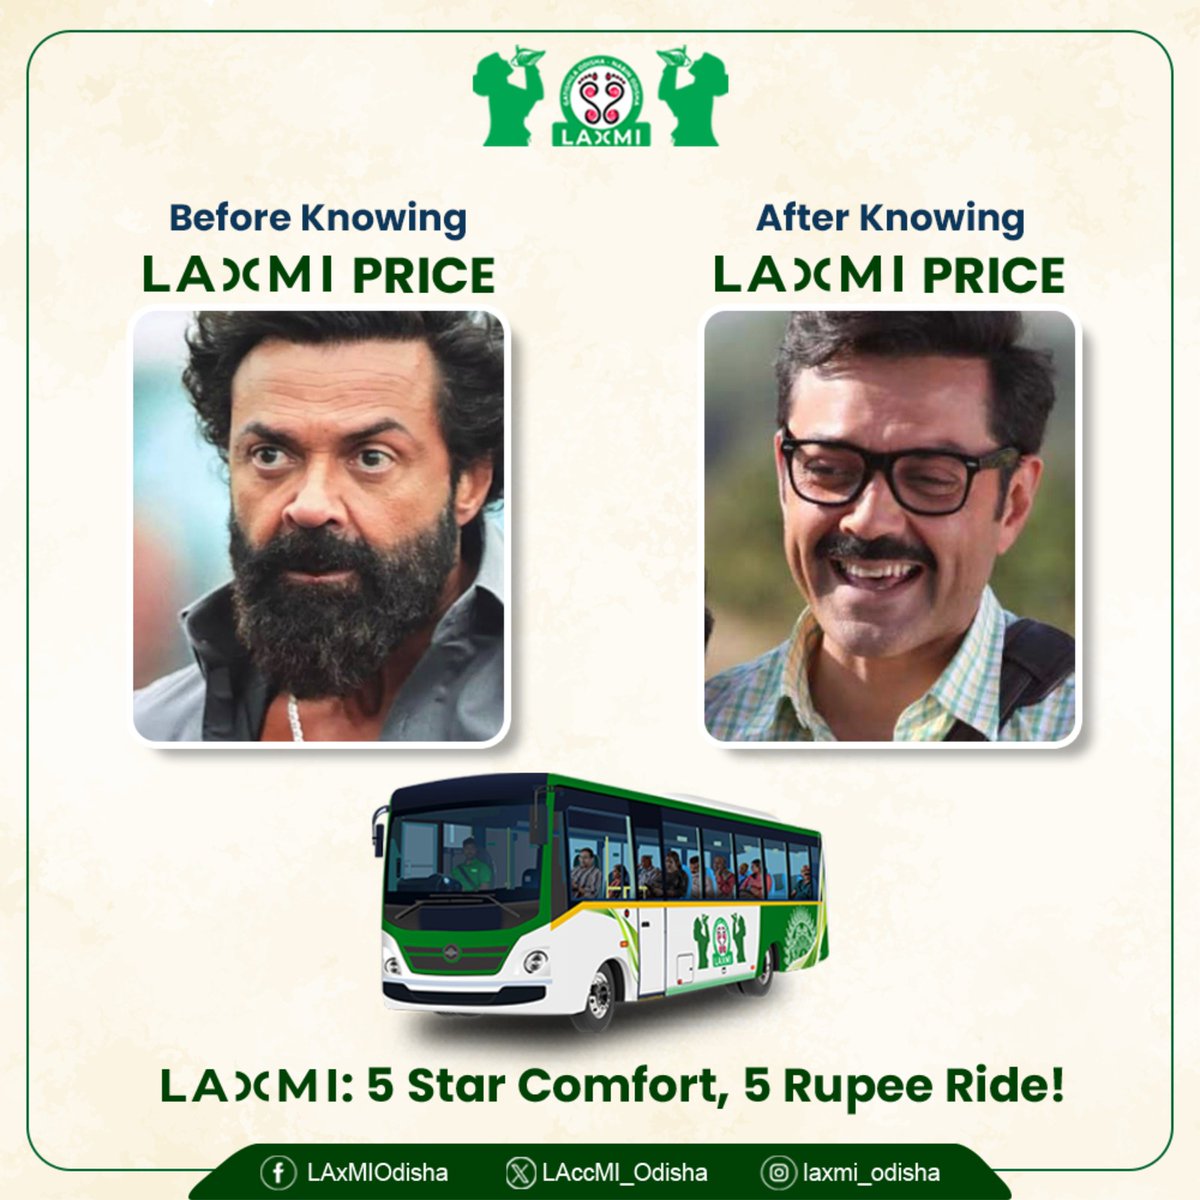 Make every rupee count, Ride with LAXMI for JUST ₹5!

What's the wait?

Travel with LAXMI, explore more, spend less and smile wider.

#LaxmiYojana
#AffordableRide
#GhareGhareLaxmi
#JamalKudu